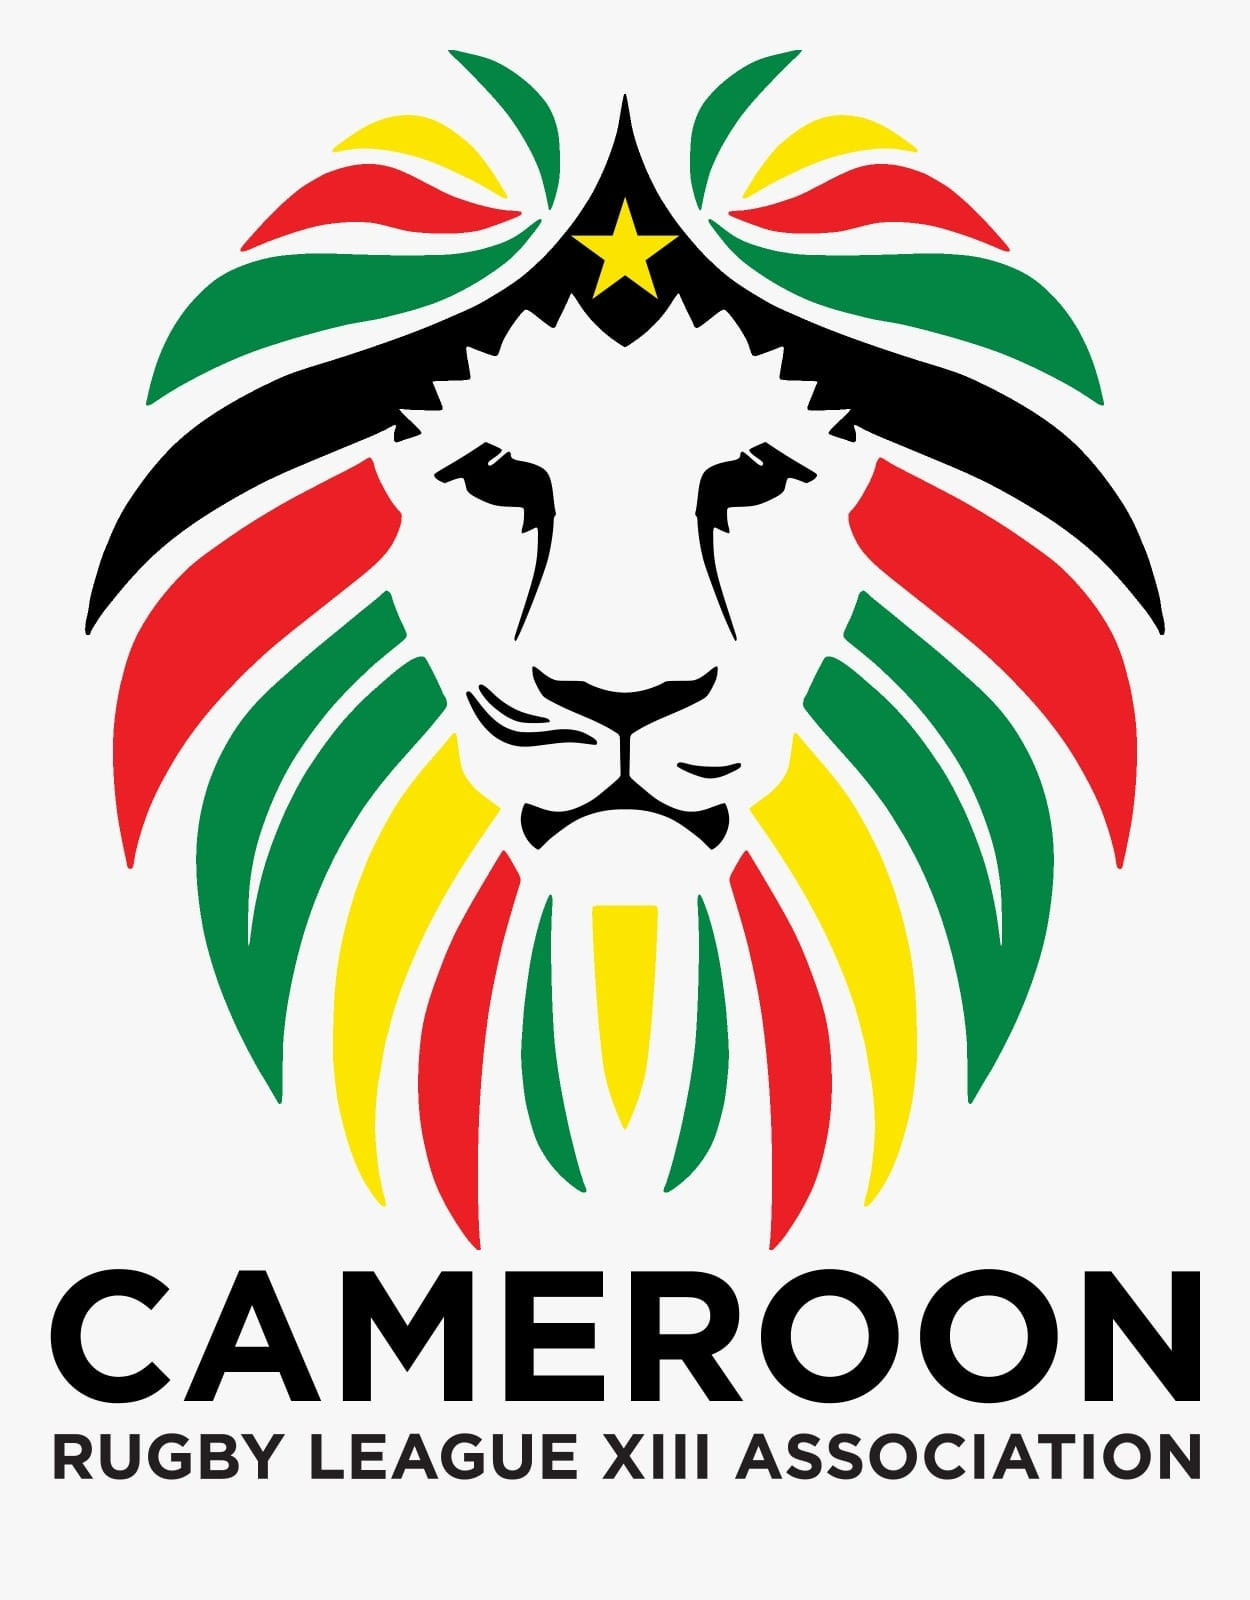 Cameroon set to become affiliate member of International Rugby League